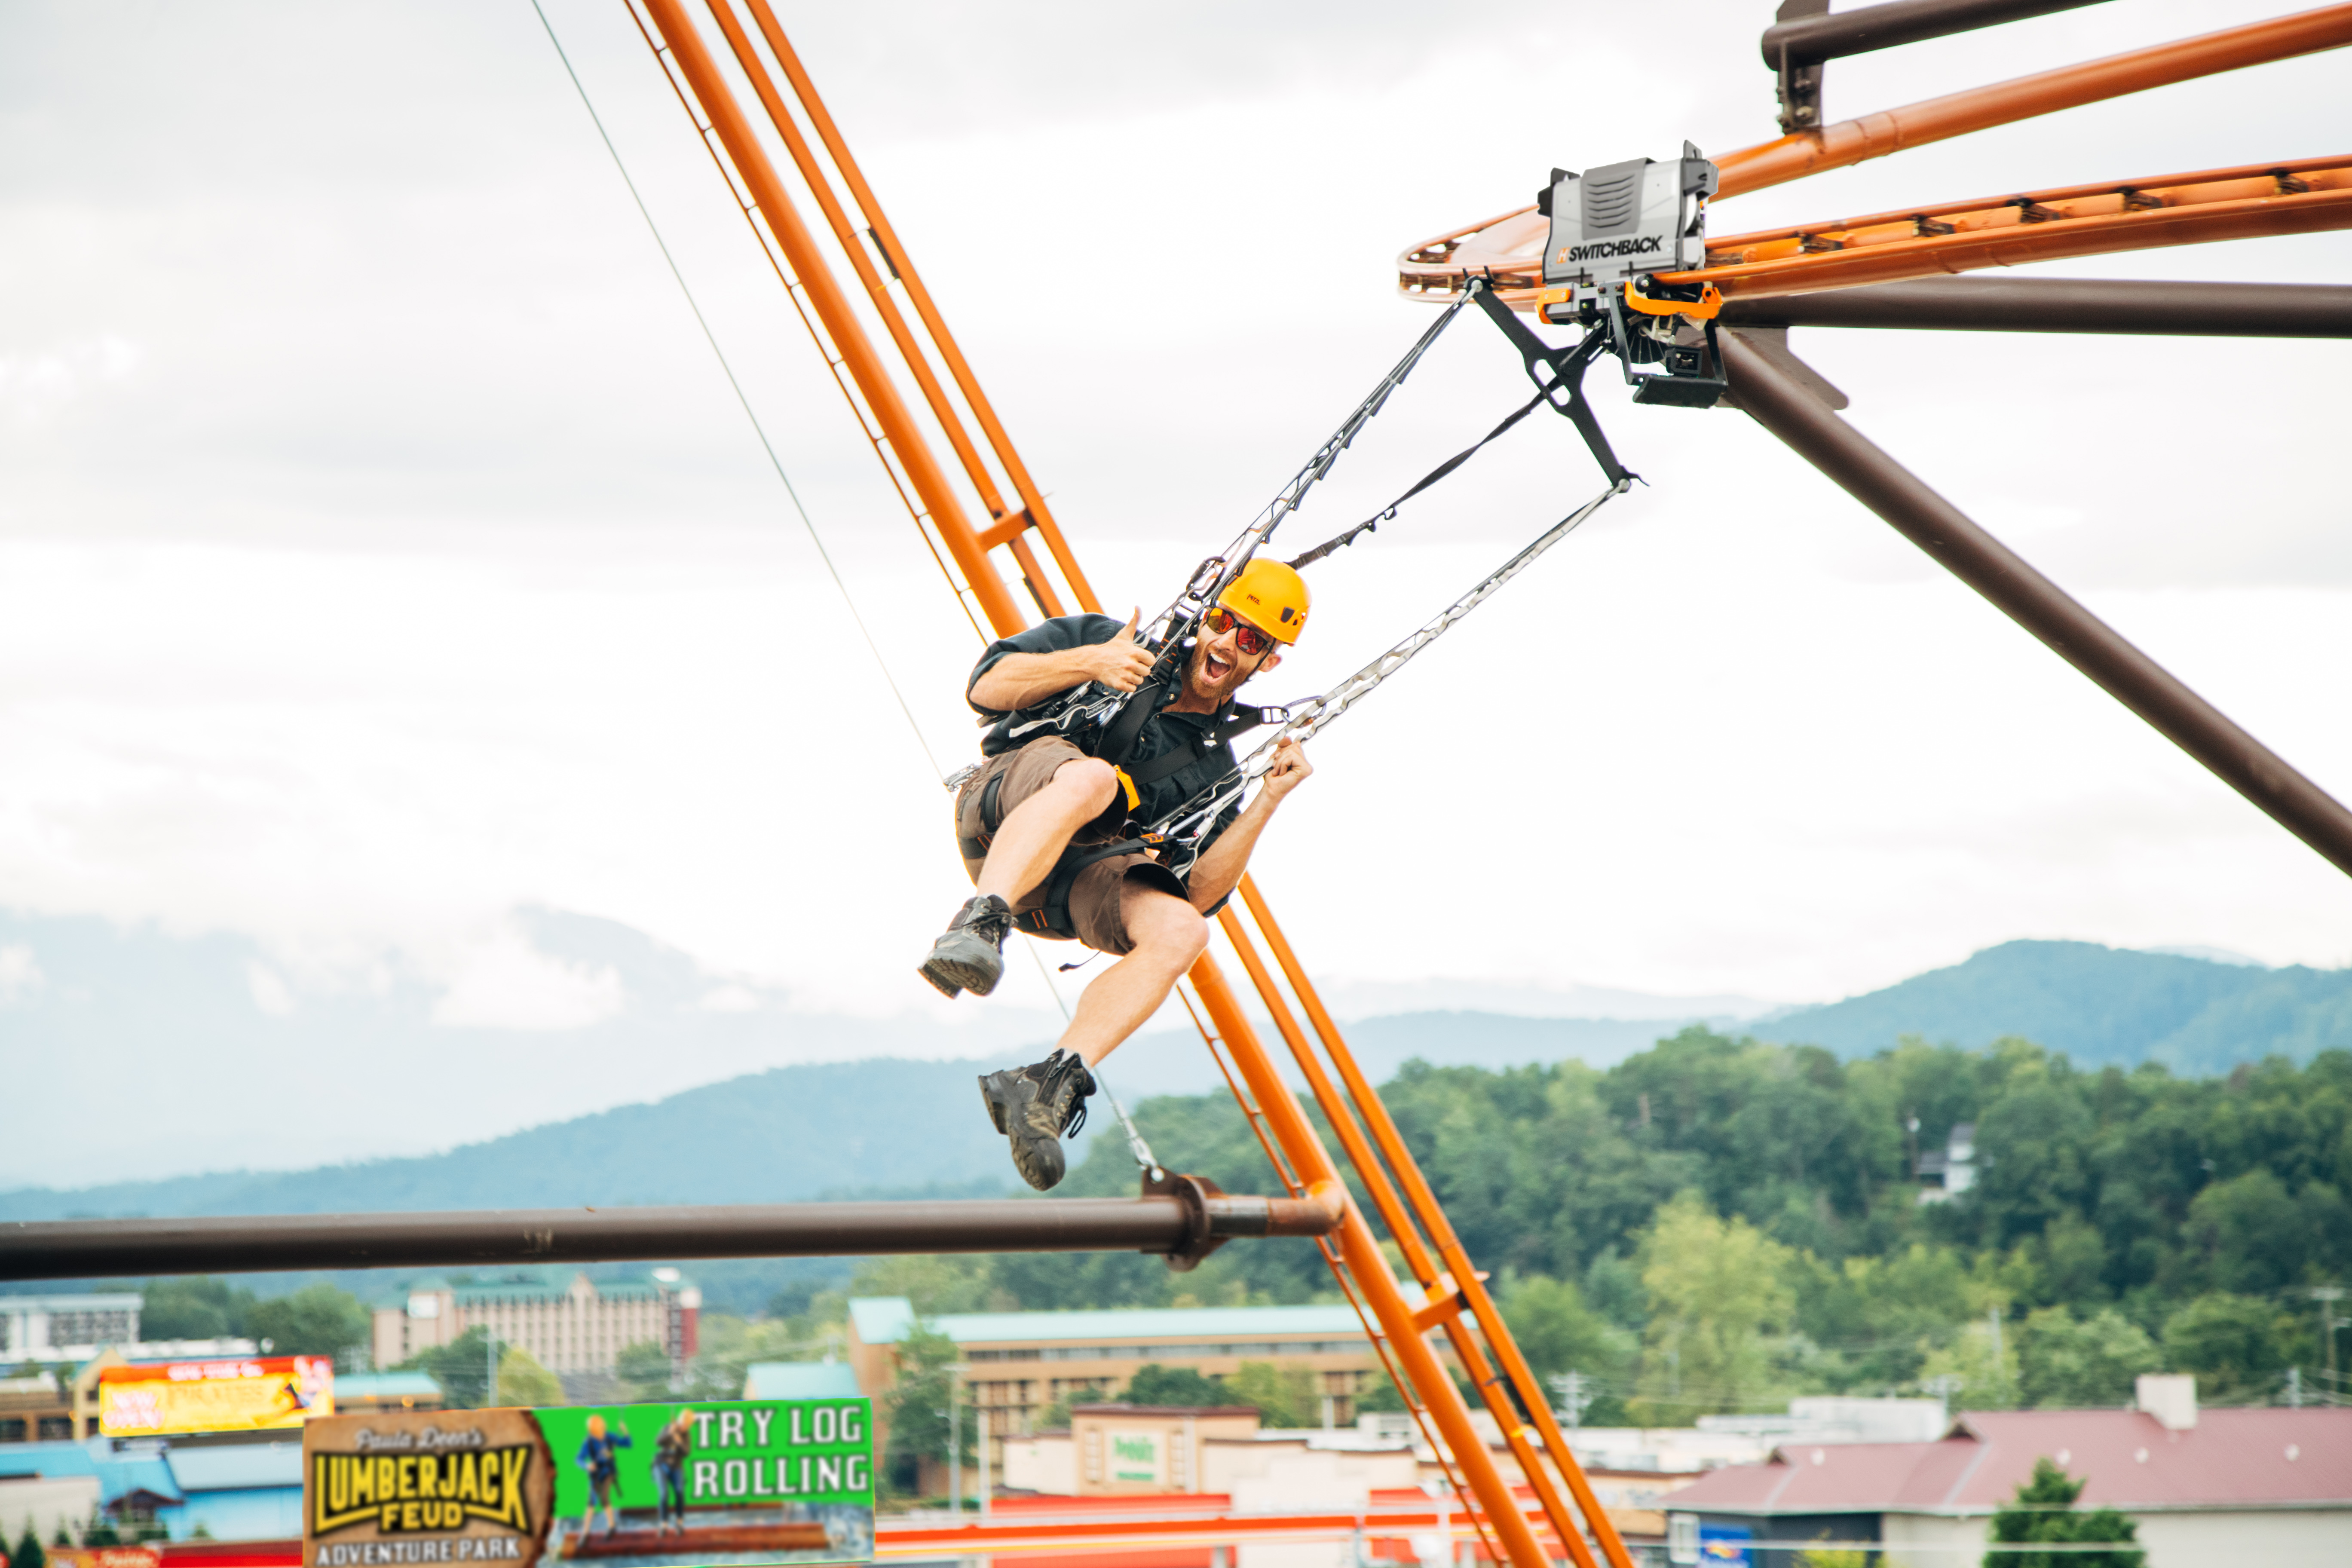 World’s First Cable-to-Rail Zipline Roller Coaster Opens in Pigeon Forge, TN